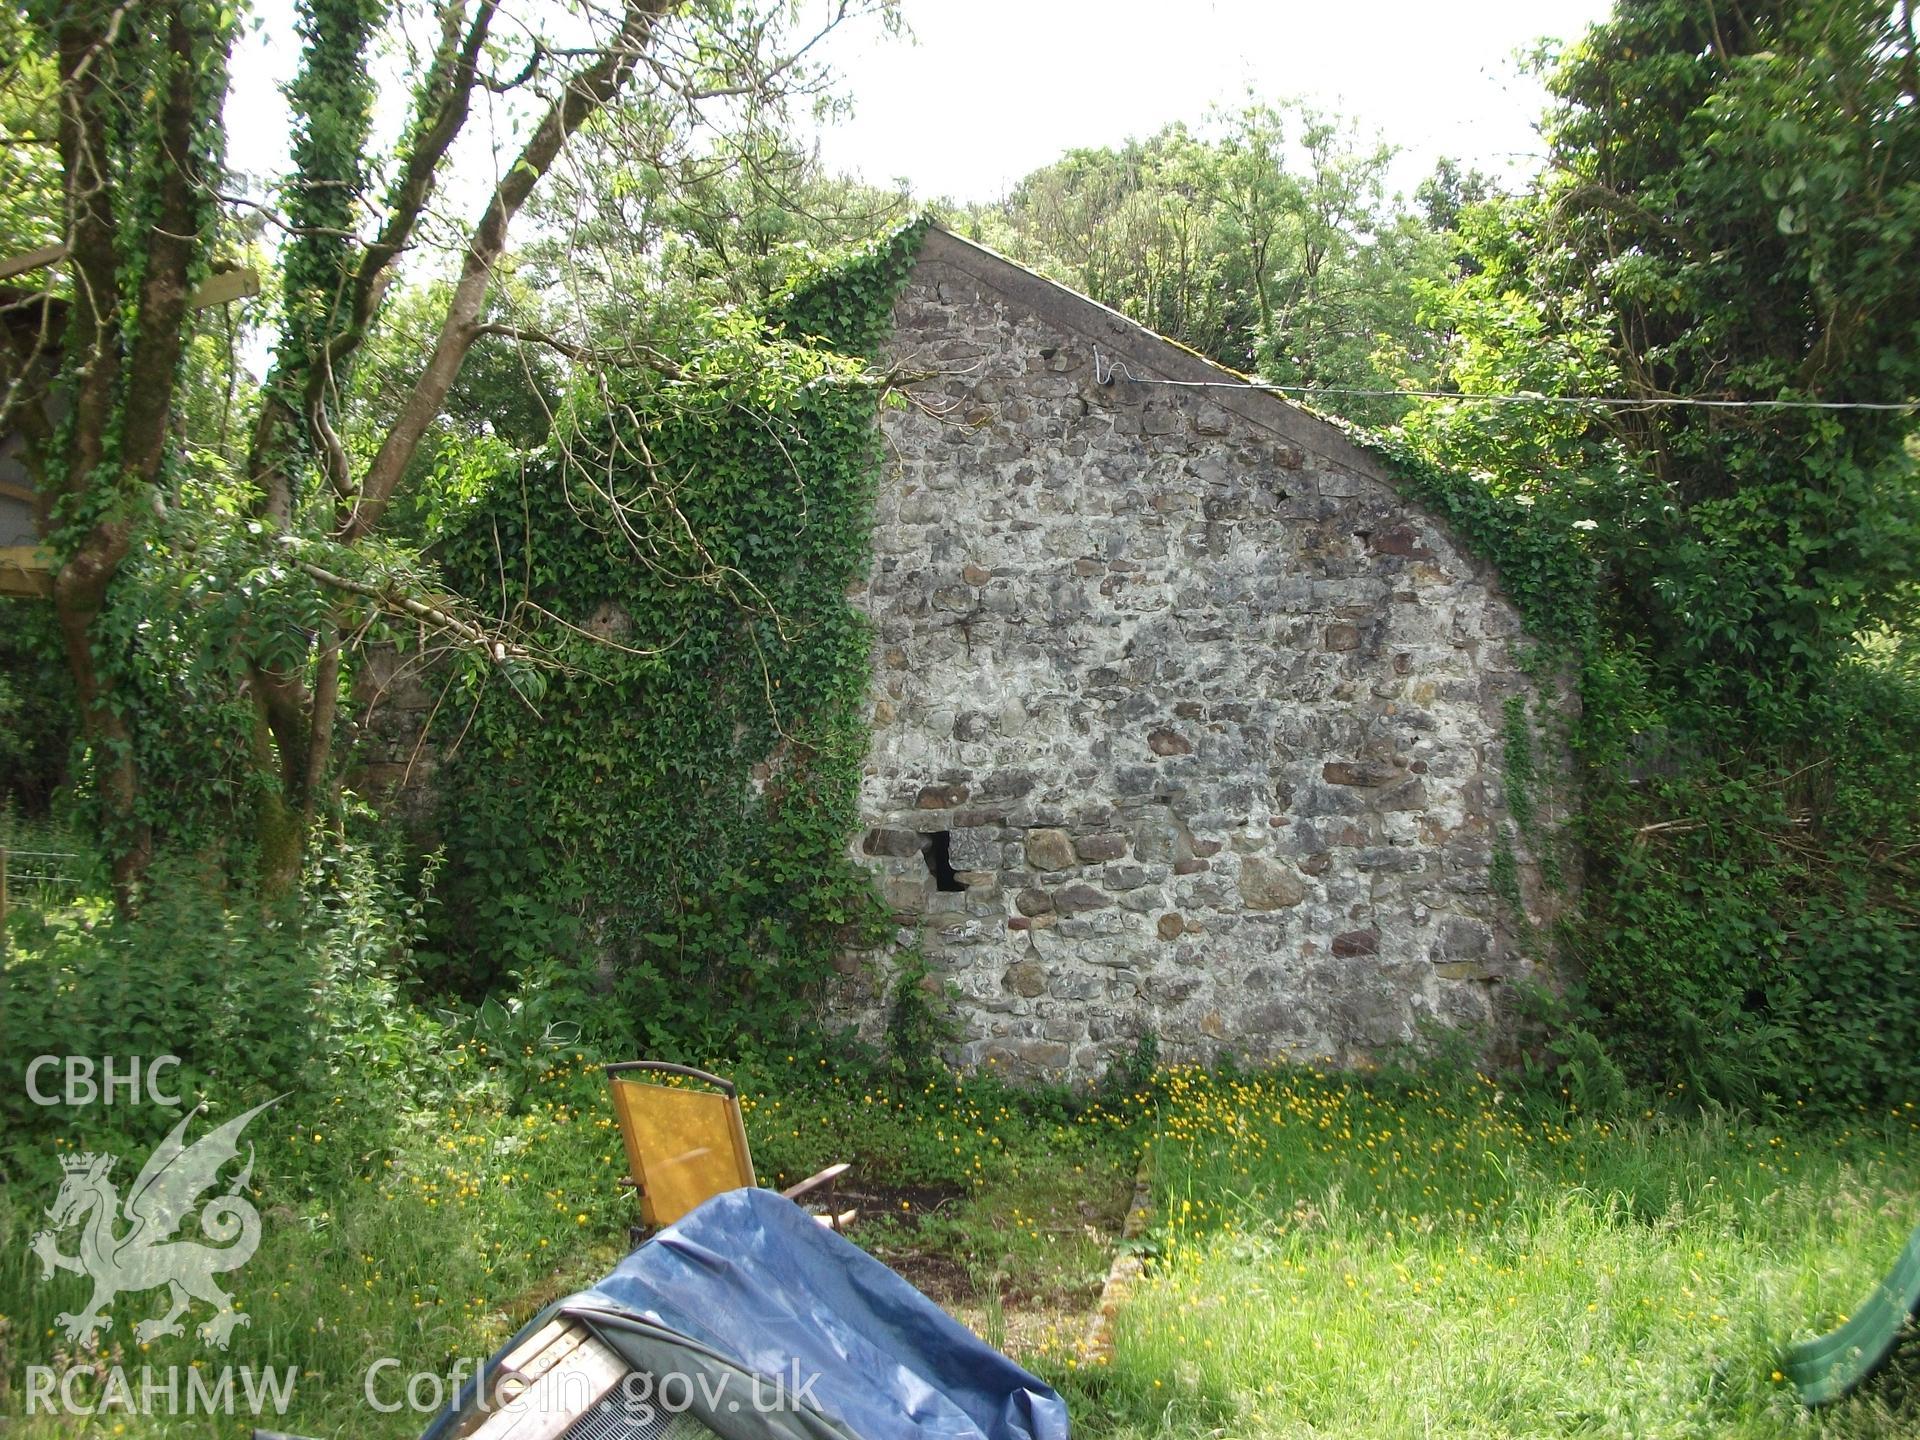 Photograph showing exterior side elevation of 'ale and pail barn,' at Pant-y-Castell, Maesybont, Photographed by Mark Waghorn to meet a condition attached to planning application.